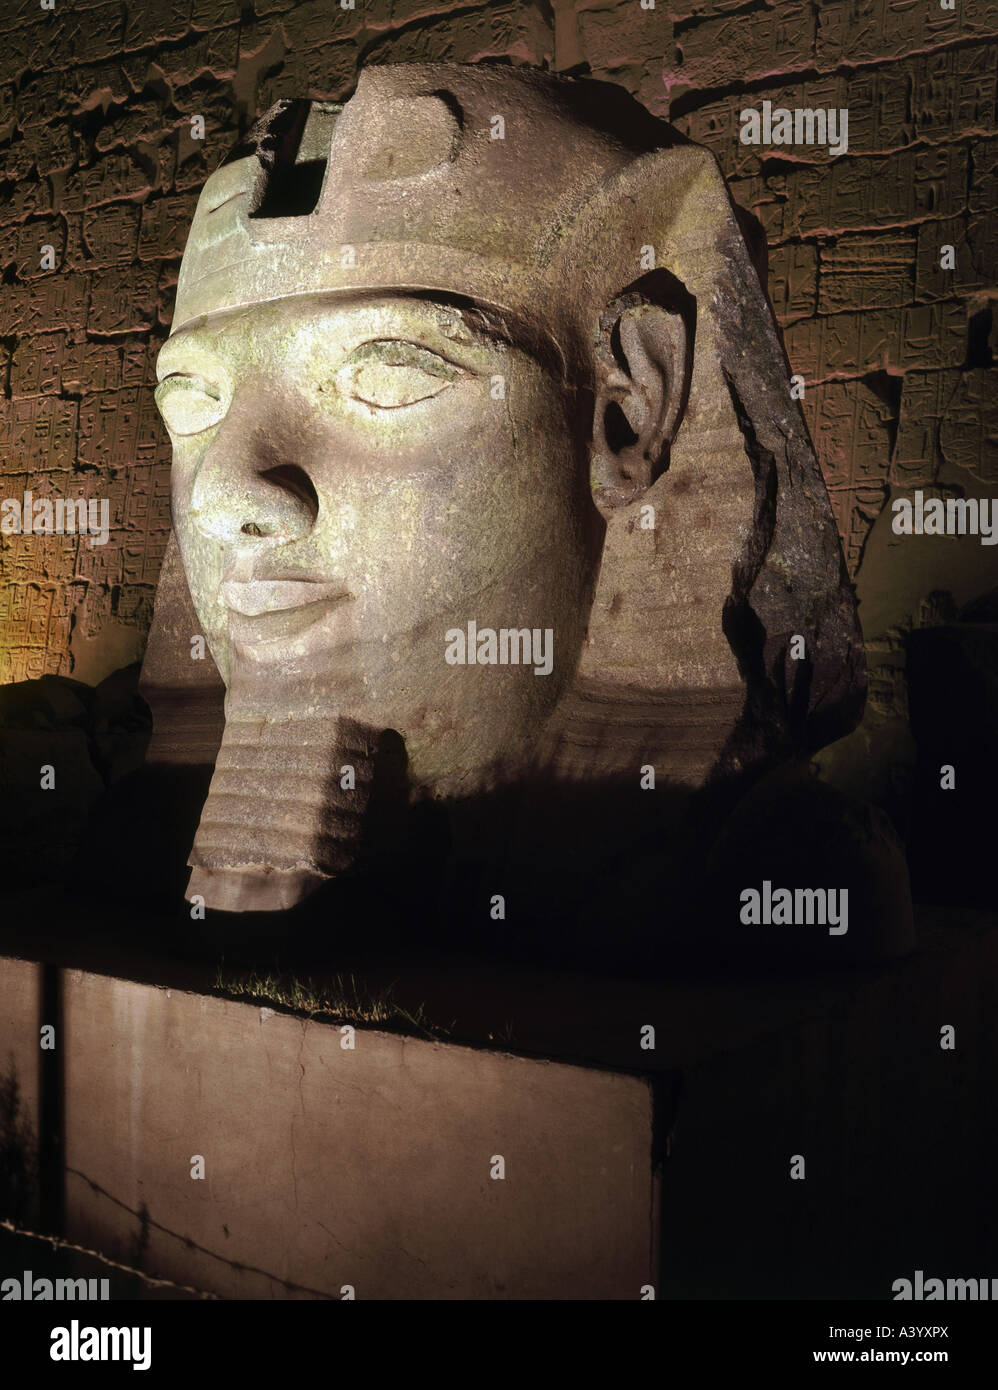 travel /geography, Egypt, Luxor, buildings, temple, Theban divine family Amun, Mut, Chons, exterior view, night, colossal head of pharaoh Ramesses II, 1304 - 1236 B.C., historic, historical, Africa, architecture, temples, ancient world, New Kingdom, 19th dynasty, 14th - 13th century B.C., sculpture, sculptures, heads, ancient world, Stock Photo